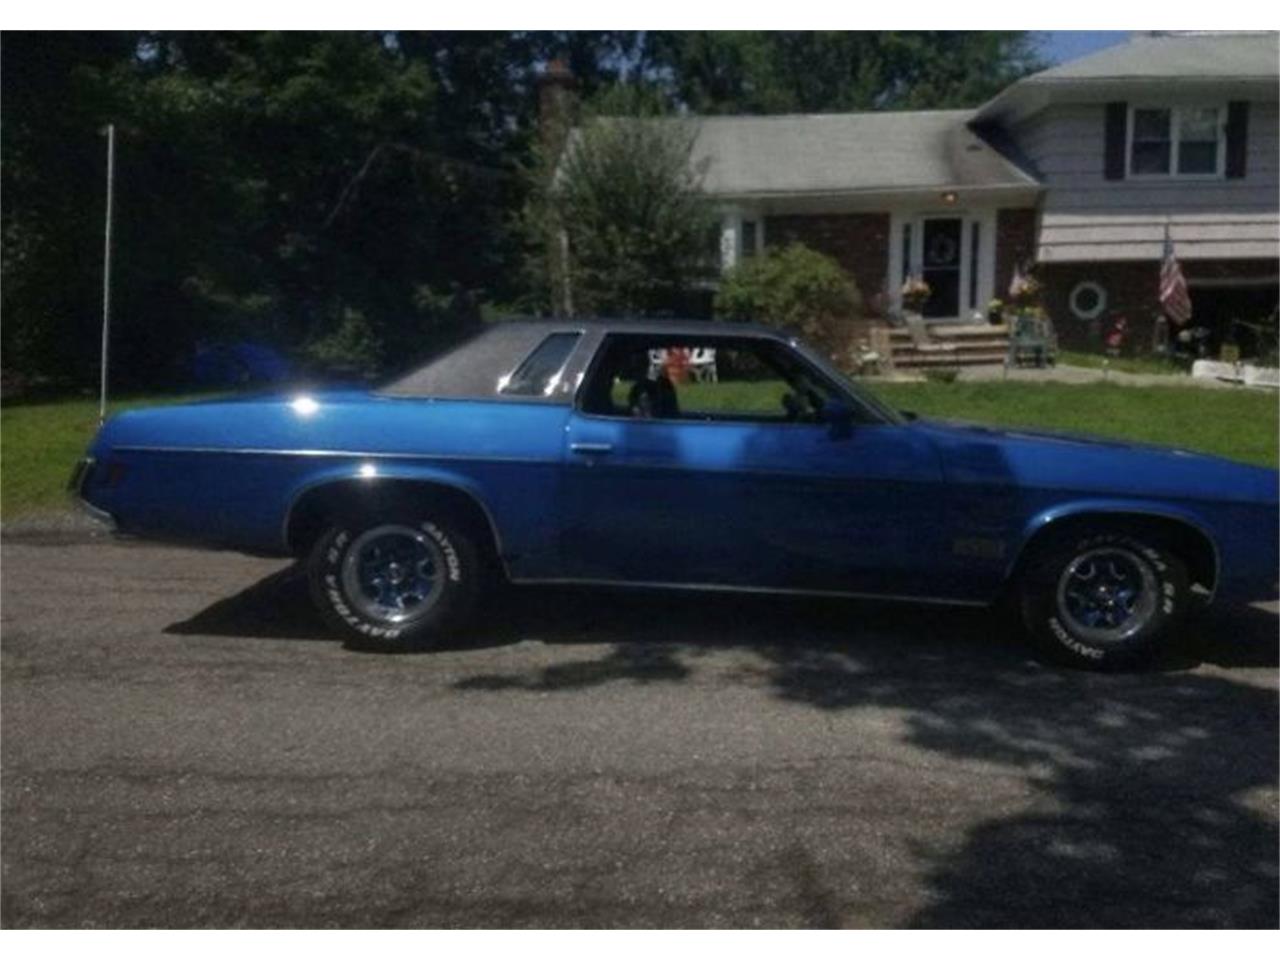 For Sale: 1973 Oldsmobile Cutlass in Cadillac, Michigan for sale in Cadillac, MI